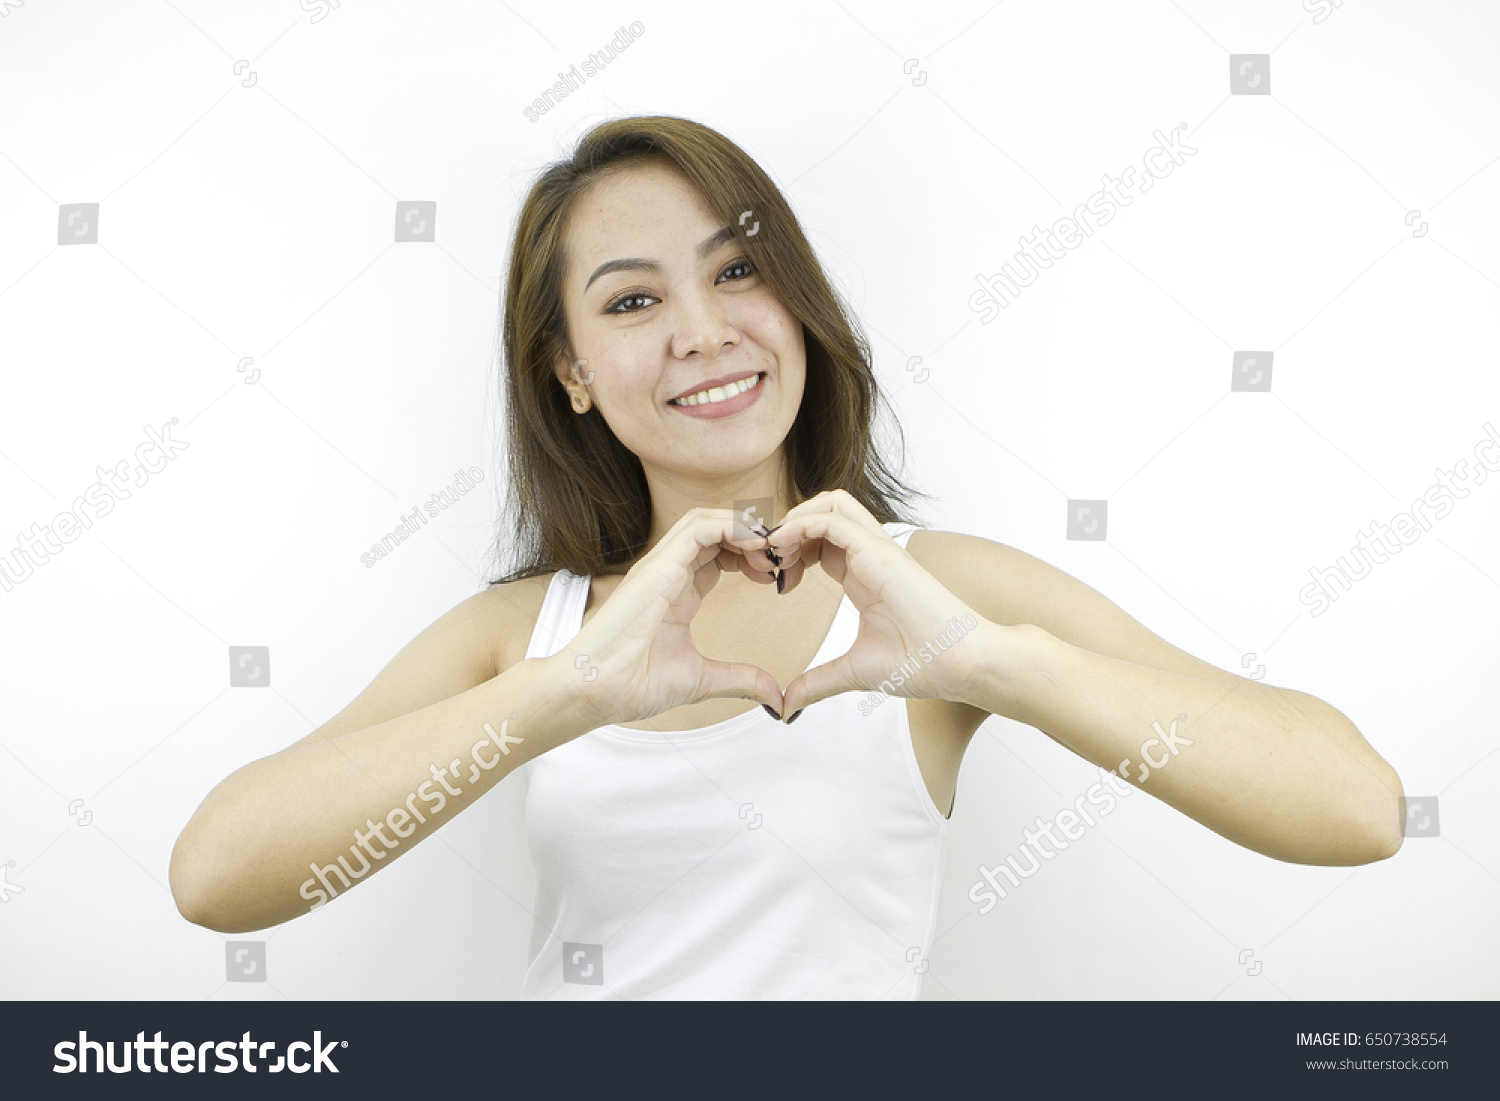 https://image.shutterstock.com/shutterstock/photos/650738554/display_1500/stock-photo-heart-or-love-sign-by-two-hands-with-lovely-face-pose-by-lifestyle-of-asian-beautiful-woman-650738554.jpg